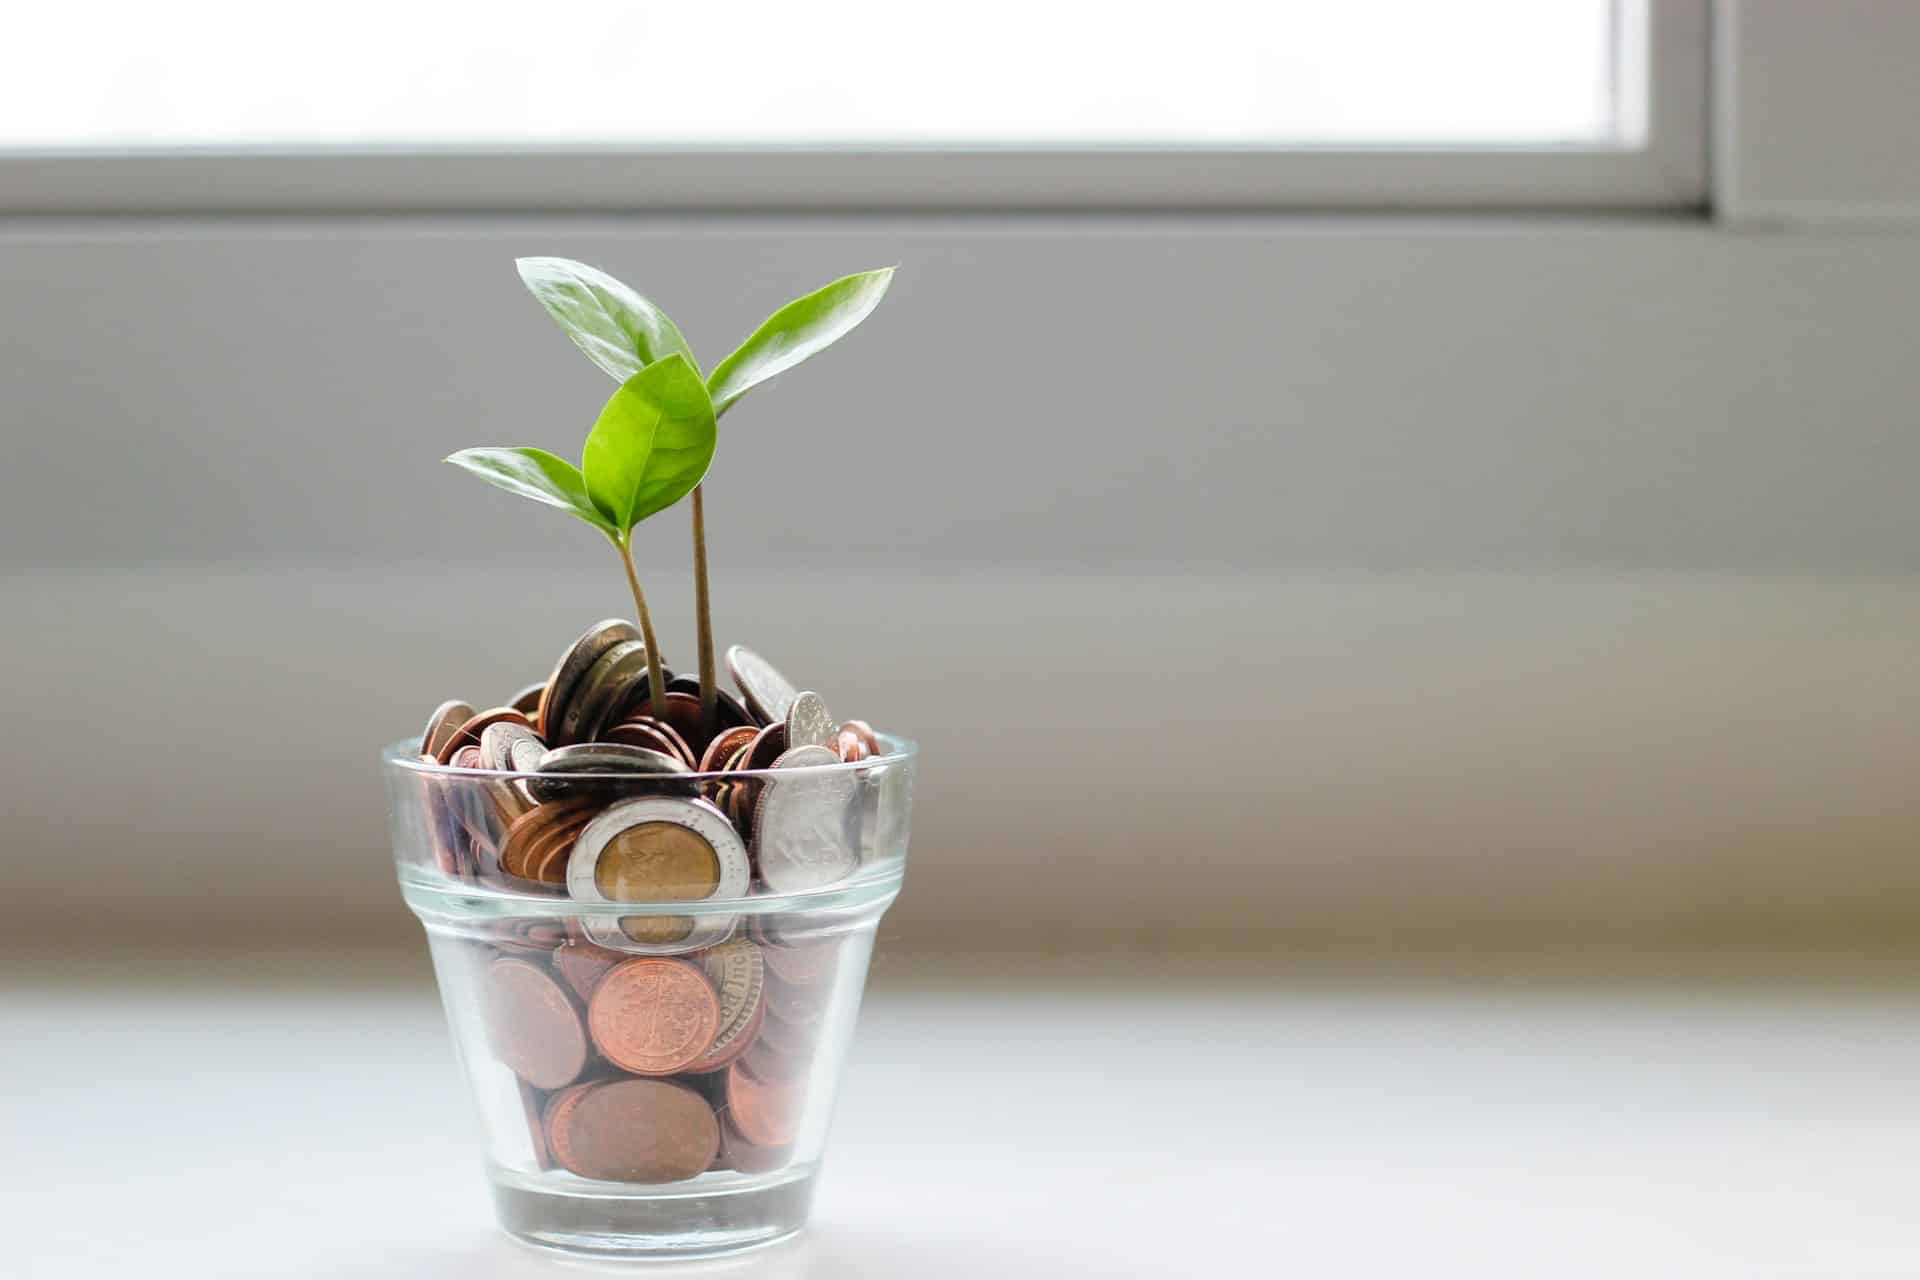 a cup filled with coins and a plant growing